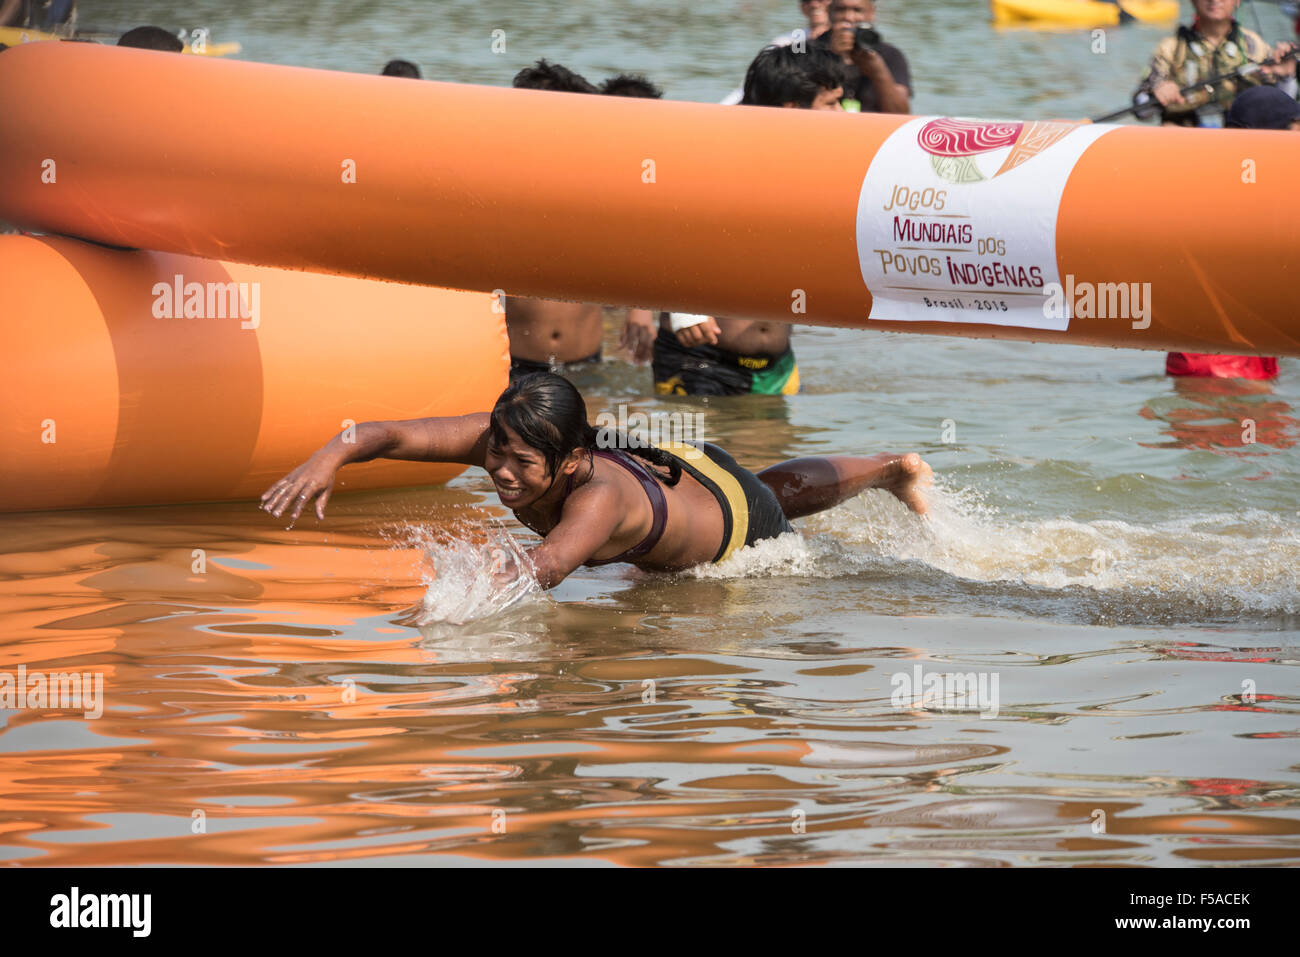 Palmas, Brazil. 30th October, 2015. Amkrokwi Gaviåo, winner of the women's swimming heat, crosses the finishing line during the women's swimming event at the International Indigenous Games, in the city of Palmas, Tocantins State, Brazil. Credit:  Sue Cunningham Photographic/Alamy Live News Stock Photo